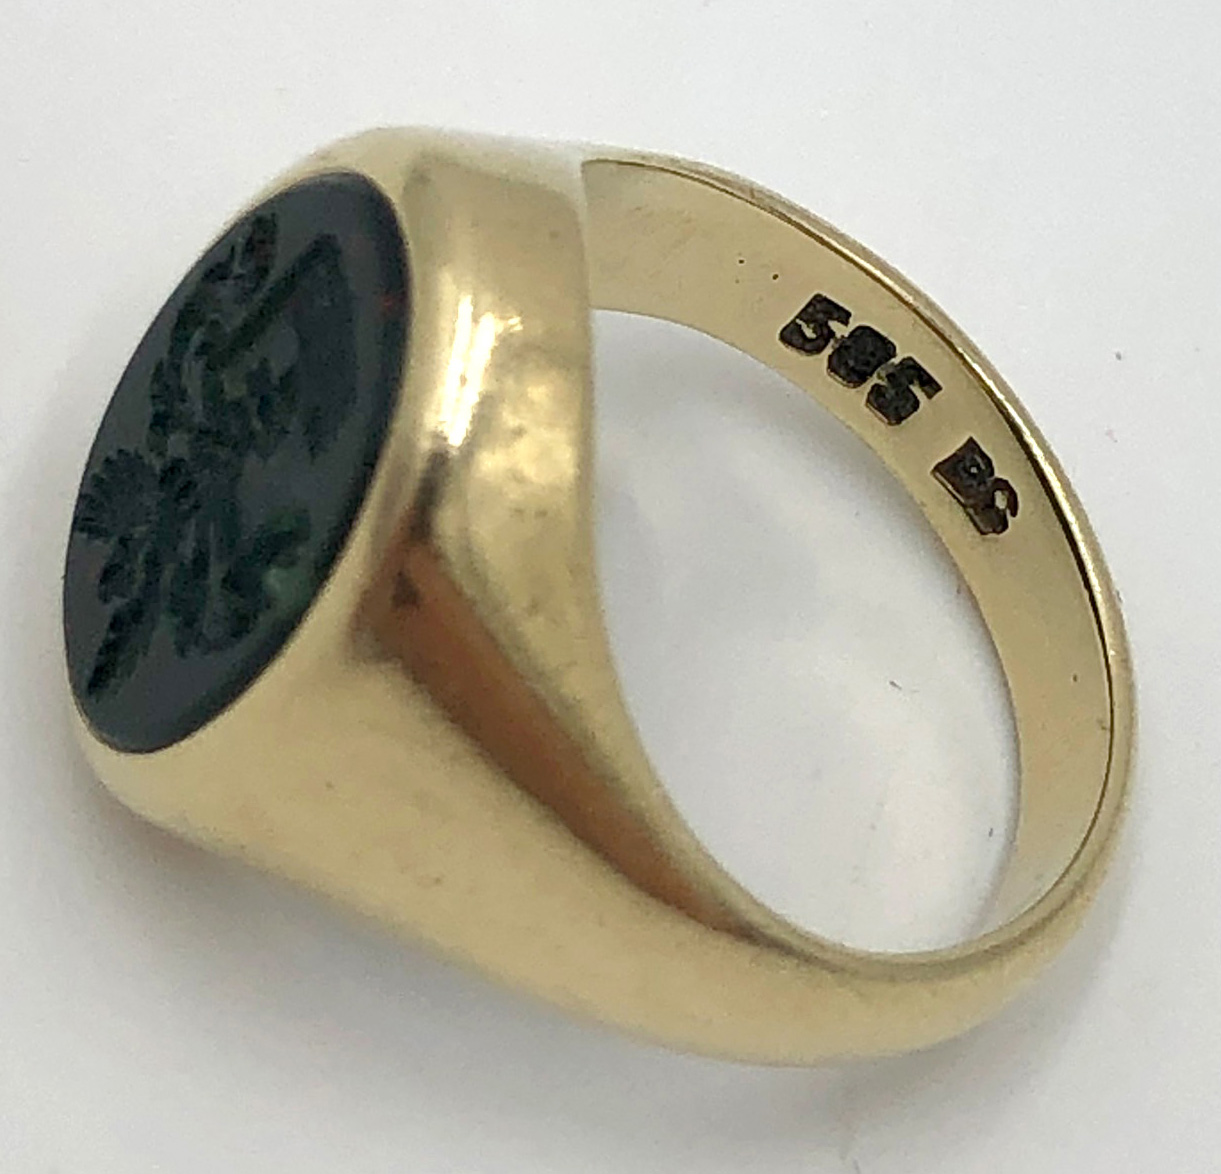 585 gold. Signet ring with onyx, engraved with a coat of arms.4.8 grams gross. 15 mm inner diameter. - Image 4 of 7